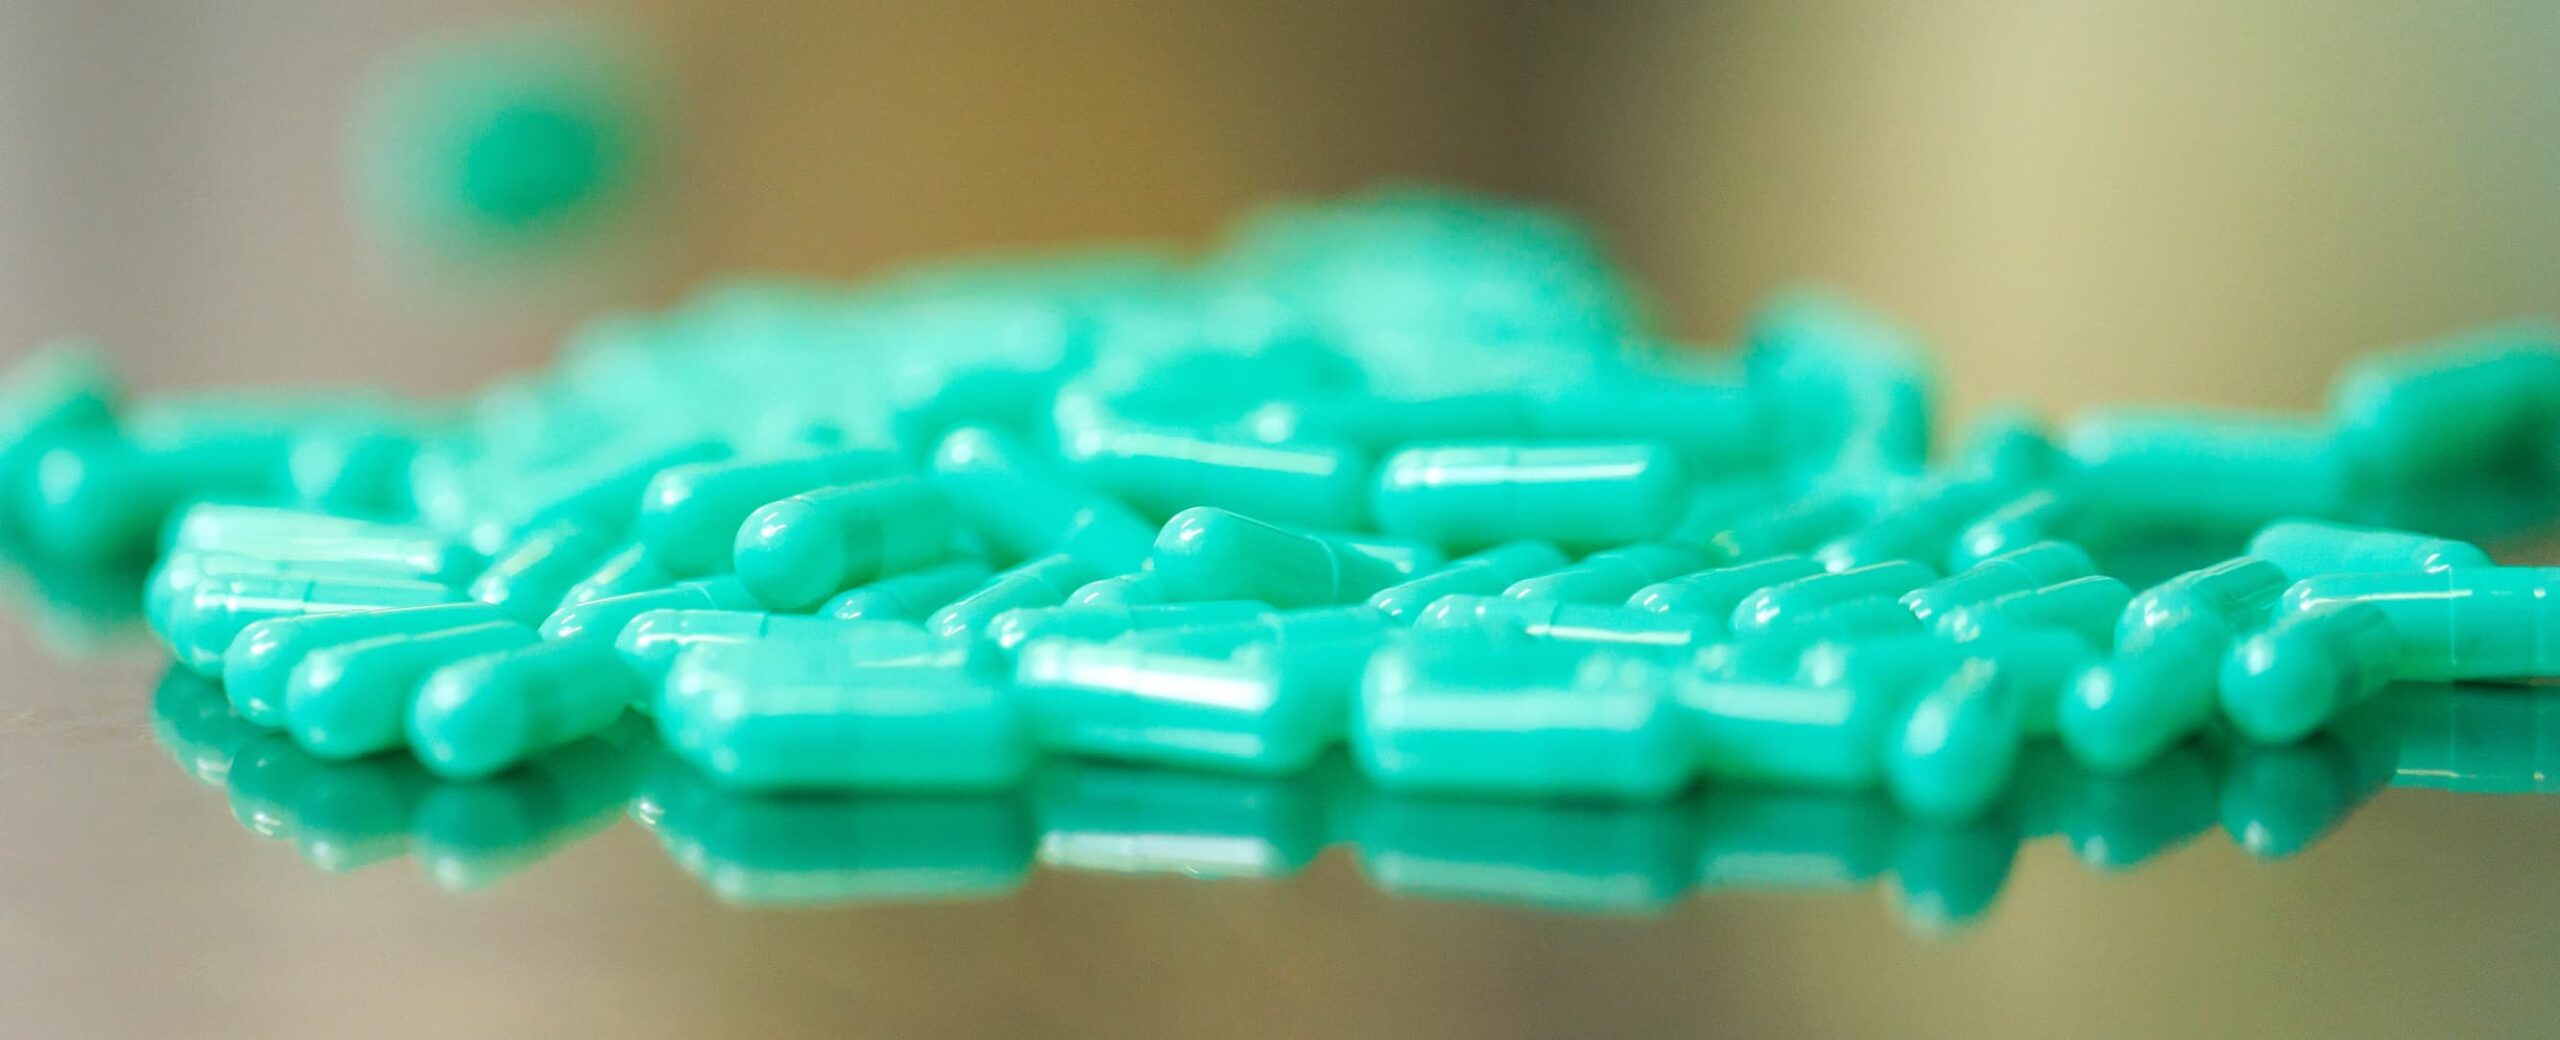 image of a pile of green pills